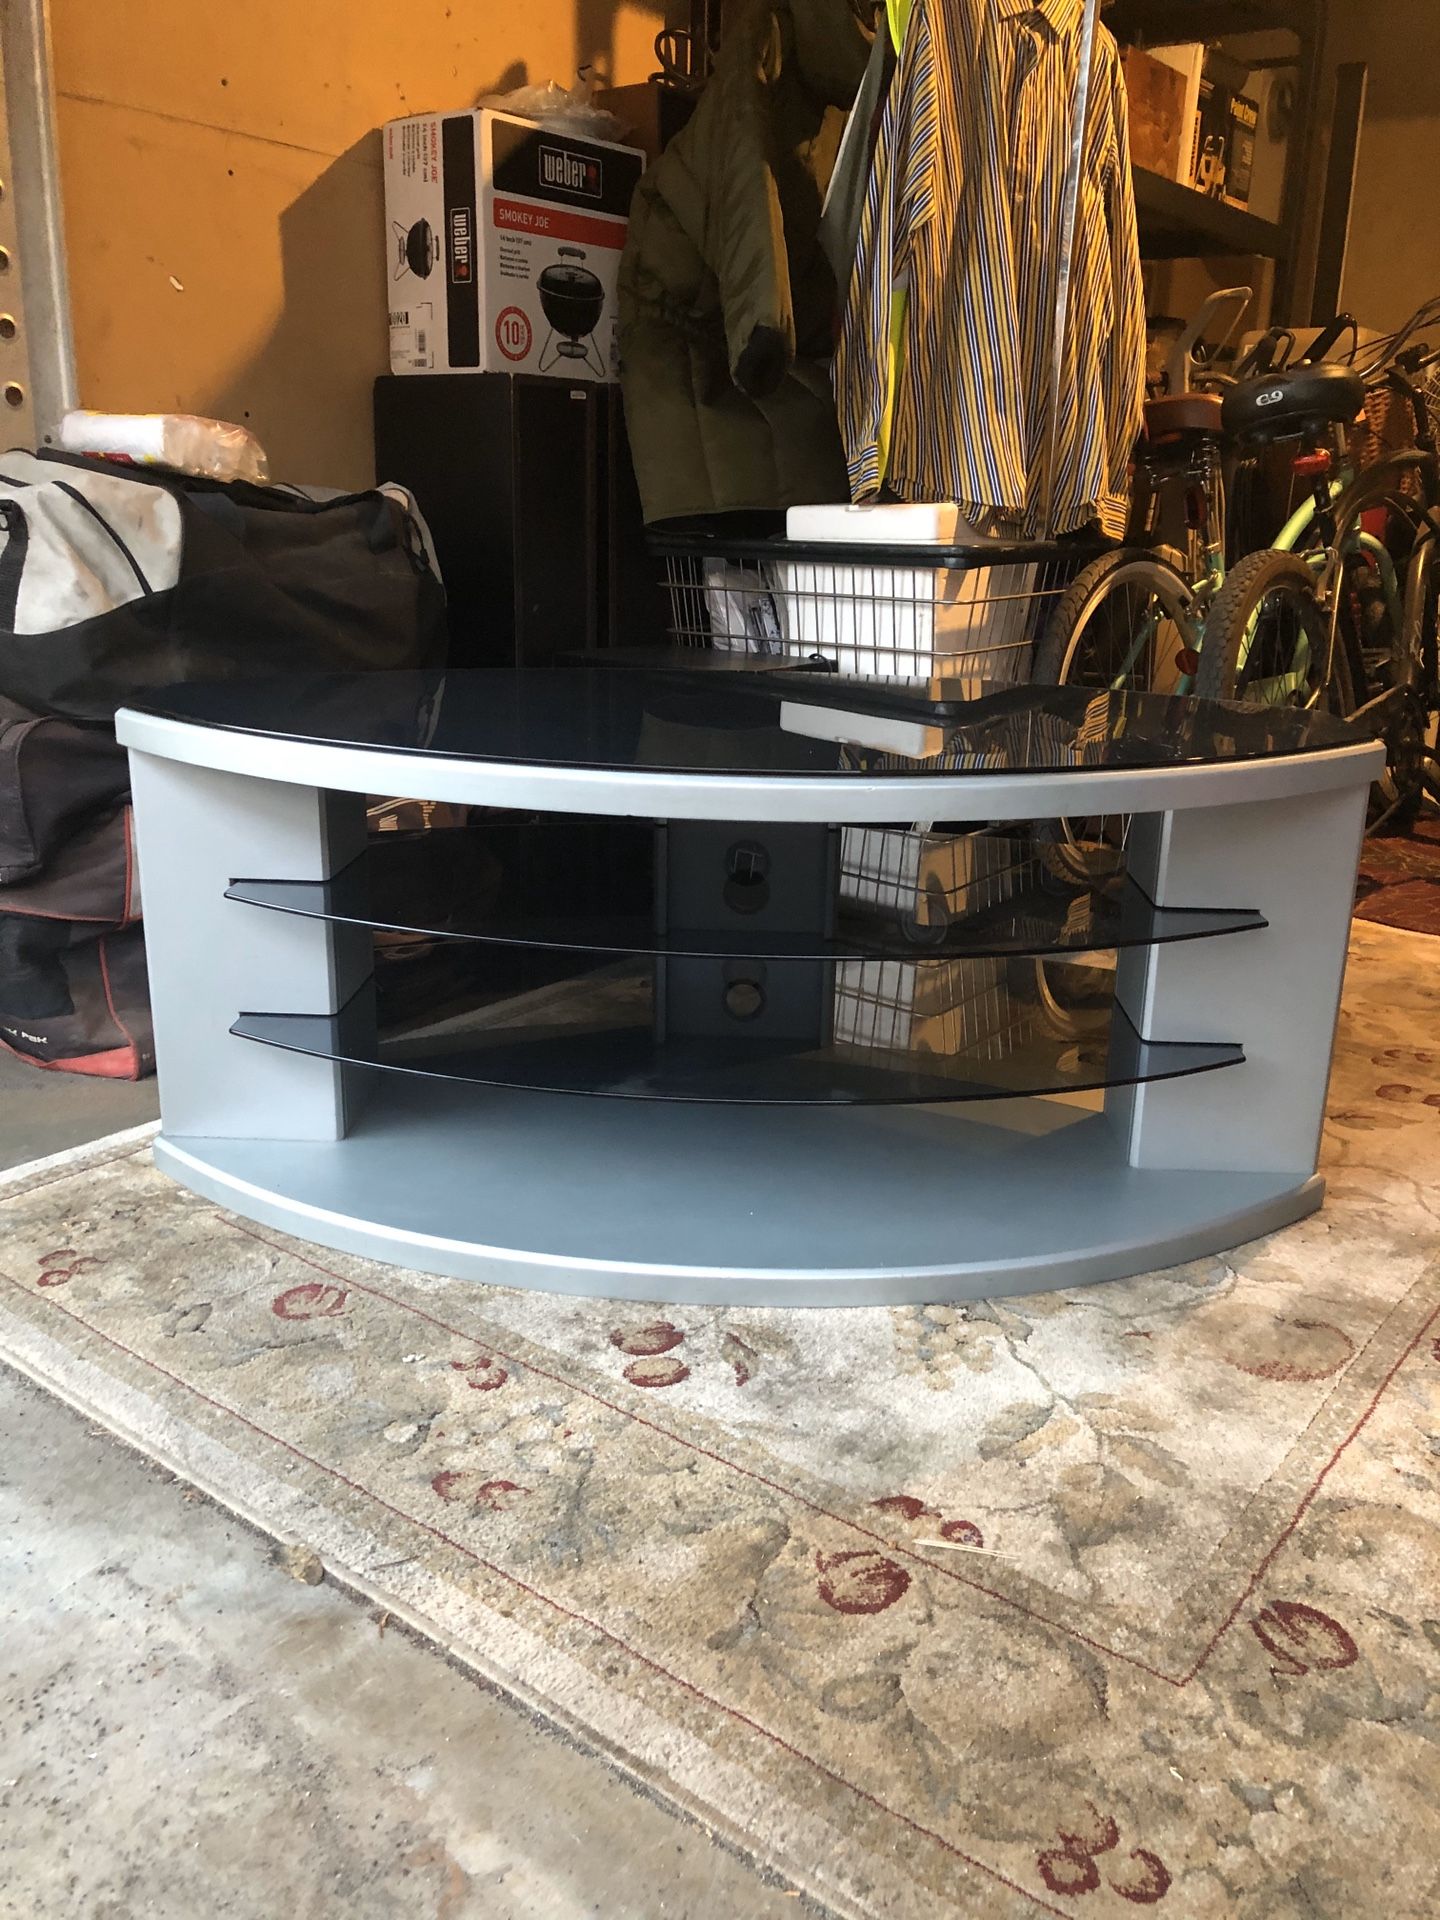 Tv stand up to 55” flat screen tv